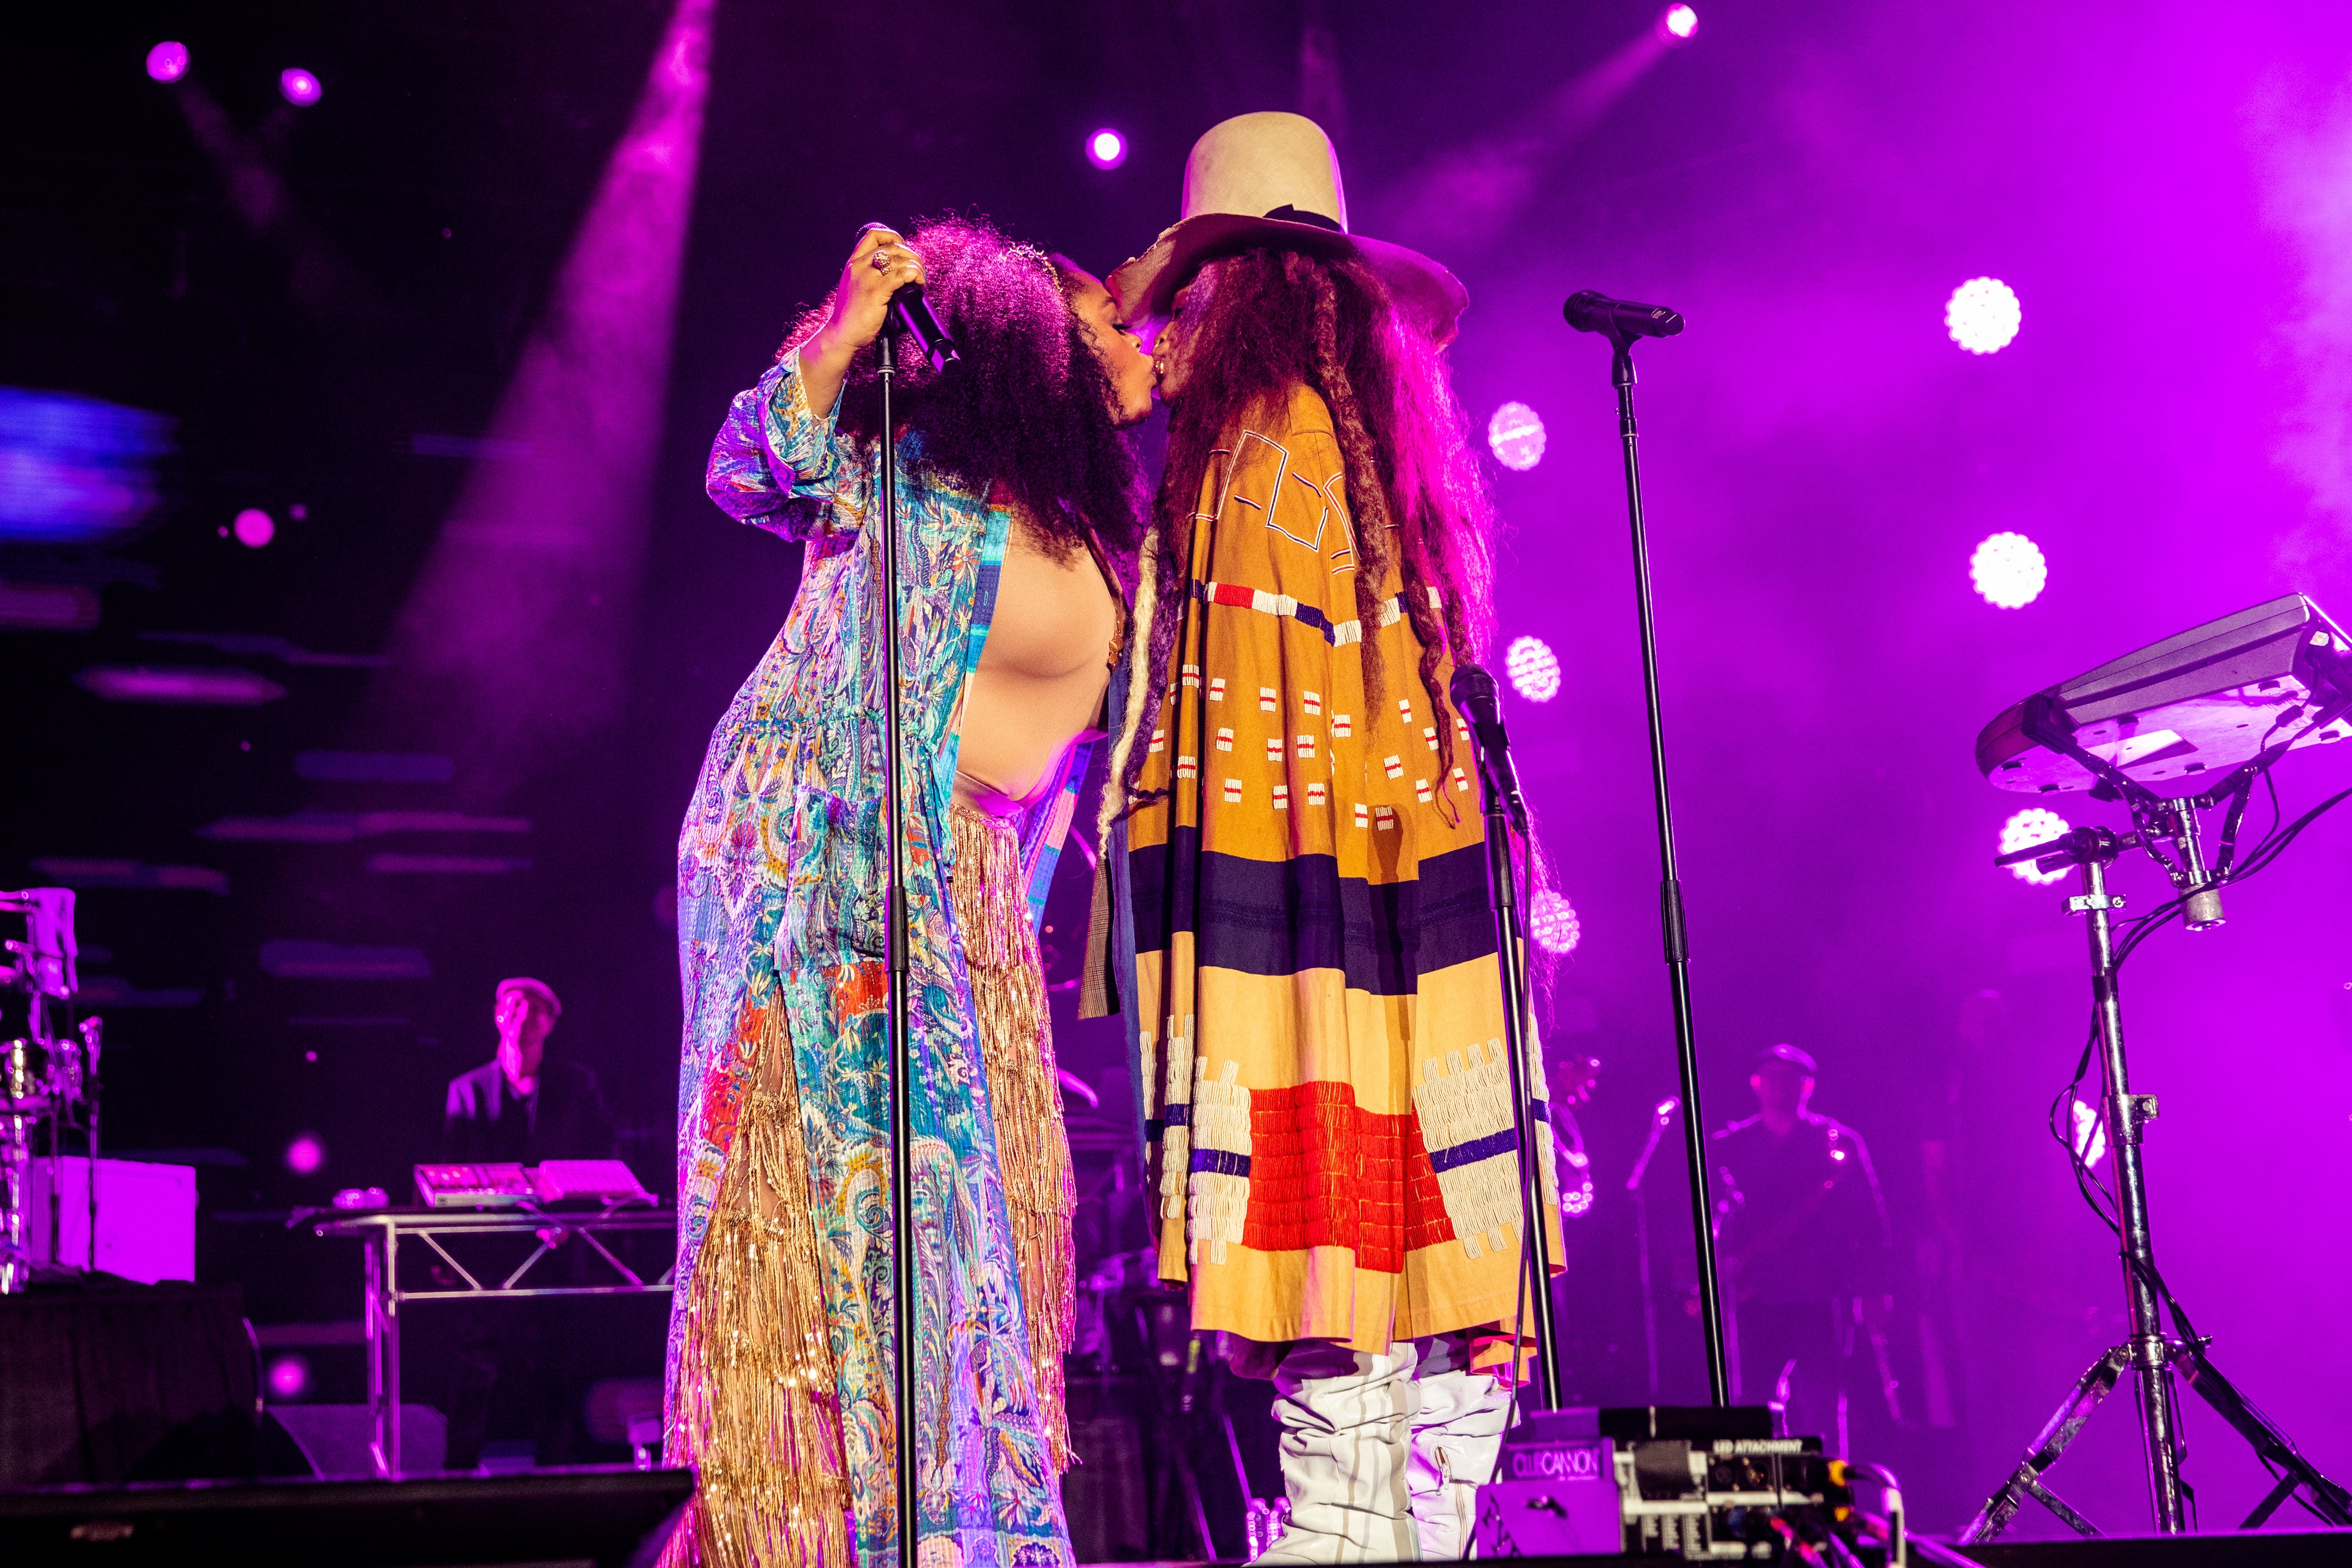 Erykah Badu and Jill Scott's Sister-Friend Lovefest at ESSENCE Fest Will Have You Calling Your Good Girlfriends
